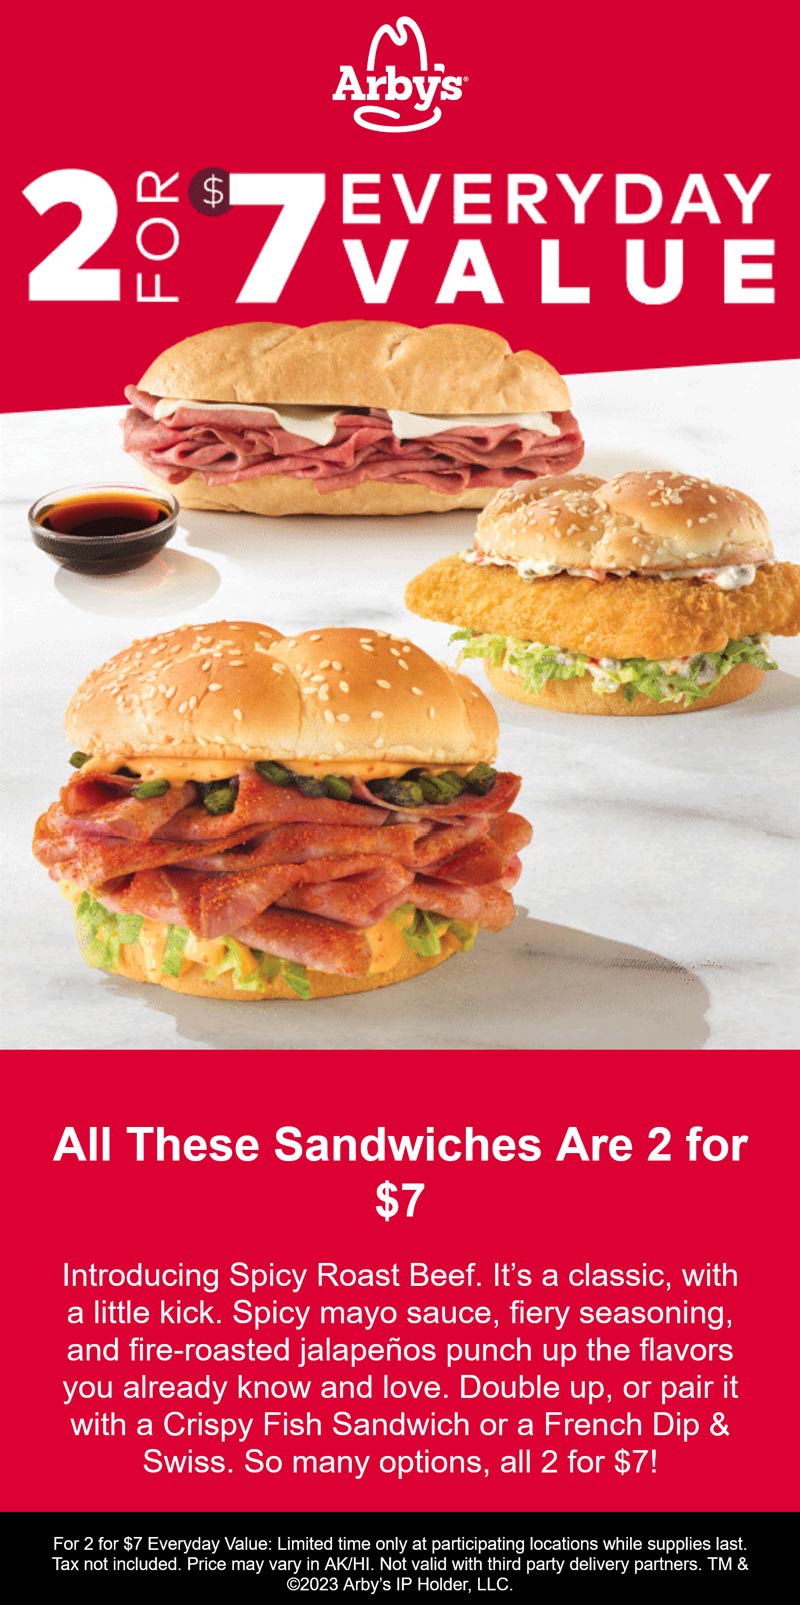 Arbys restaurants Coupon  French dip, spicy beef or fish sandwich are 2 for $7 at Arbys #arbys 